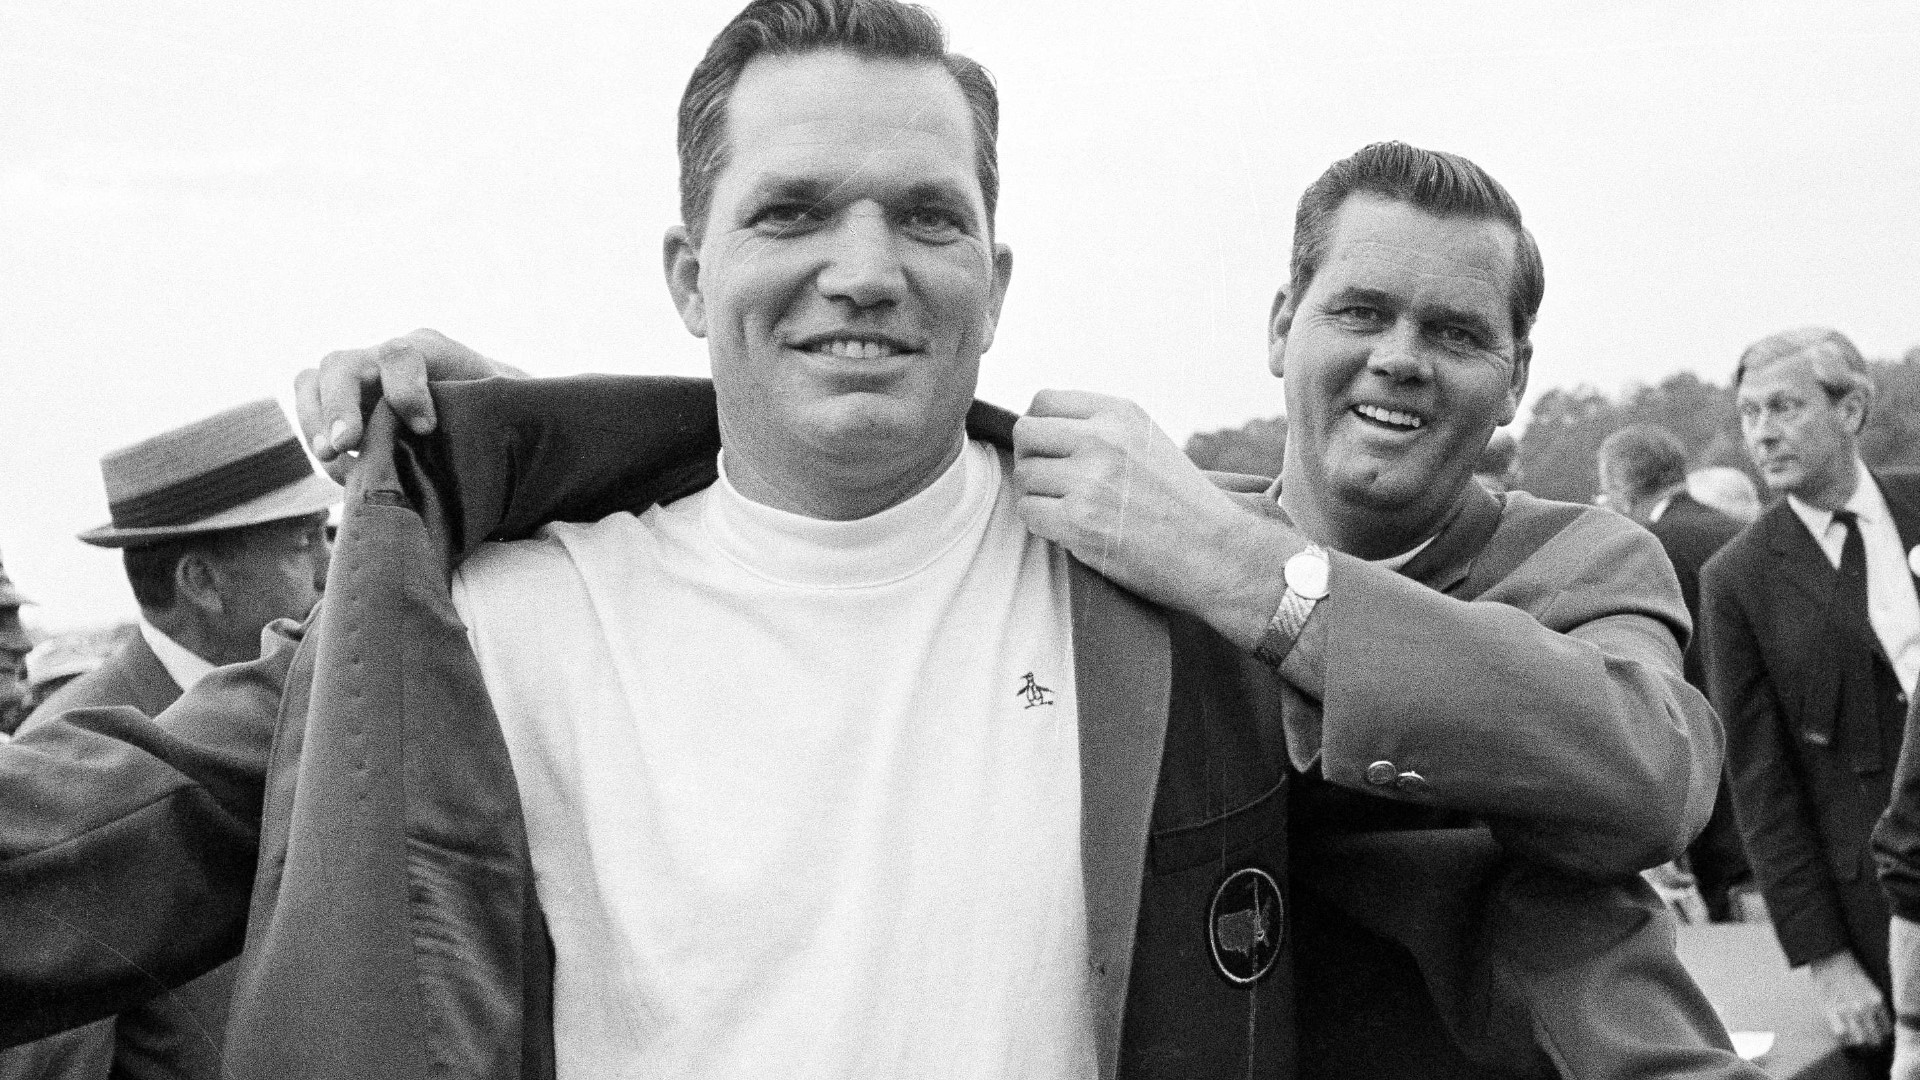 Goalby was the winner of one of the most noteworthy Masters tournaments in golf history. He died Thursday at the age of 92.